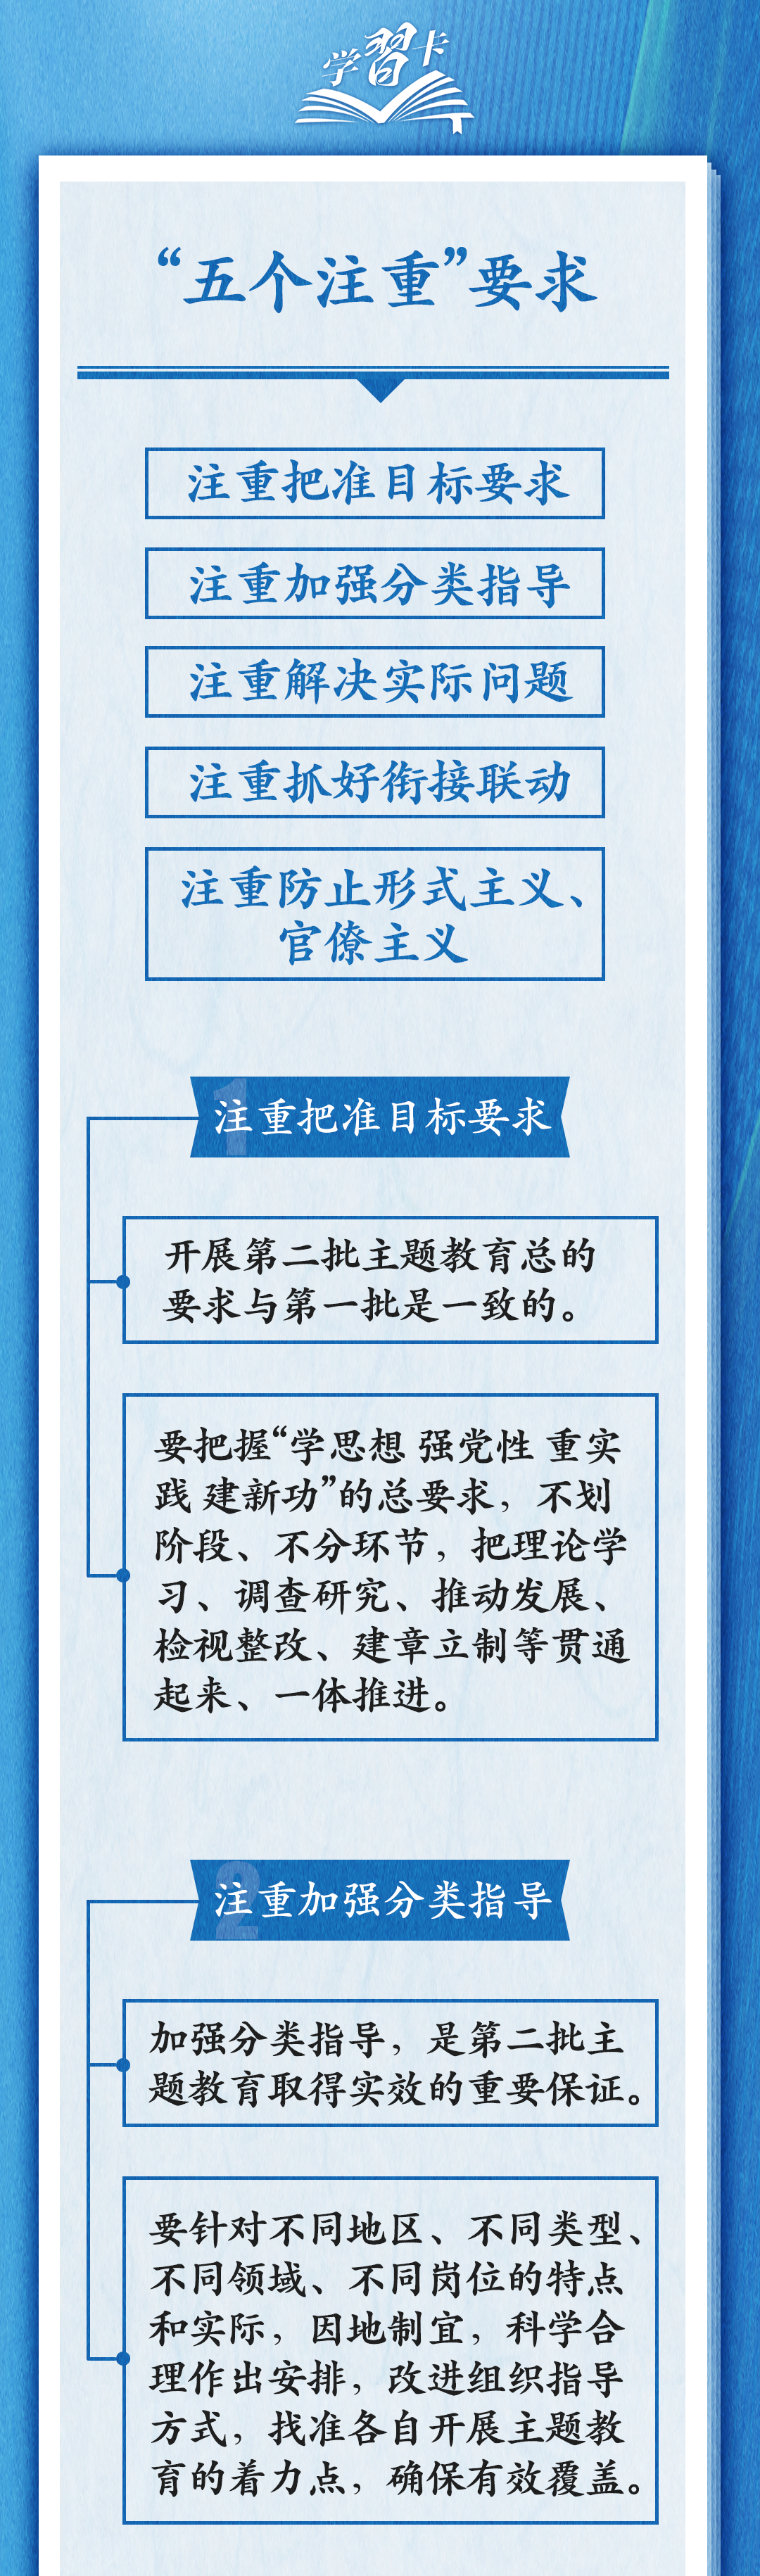 CCCC Xizhu: Carry out the Second Batch of Thematic Education to Achieve "Five Emphasis"